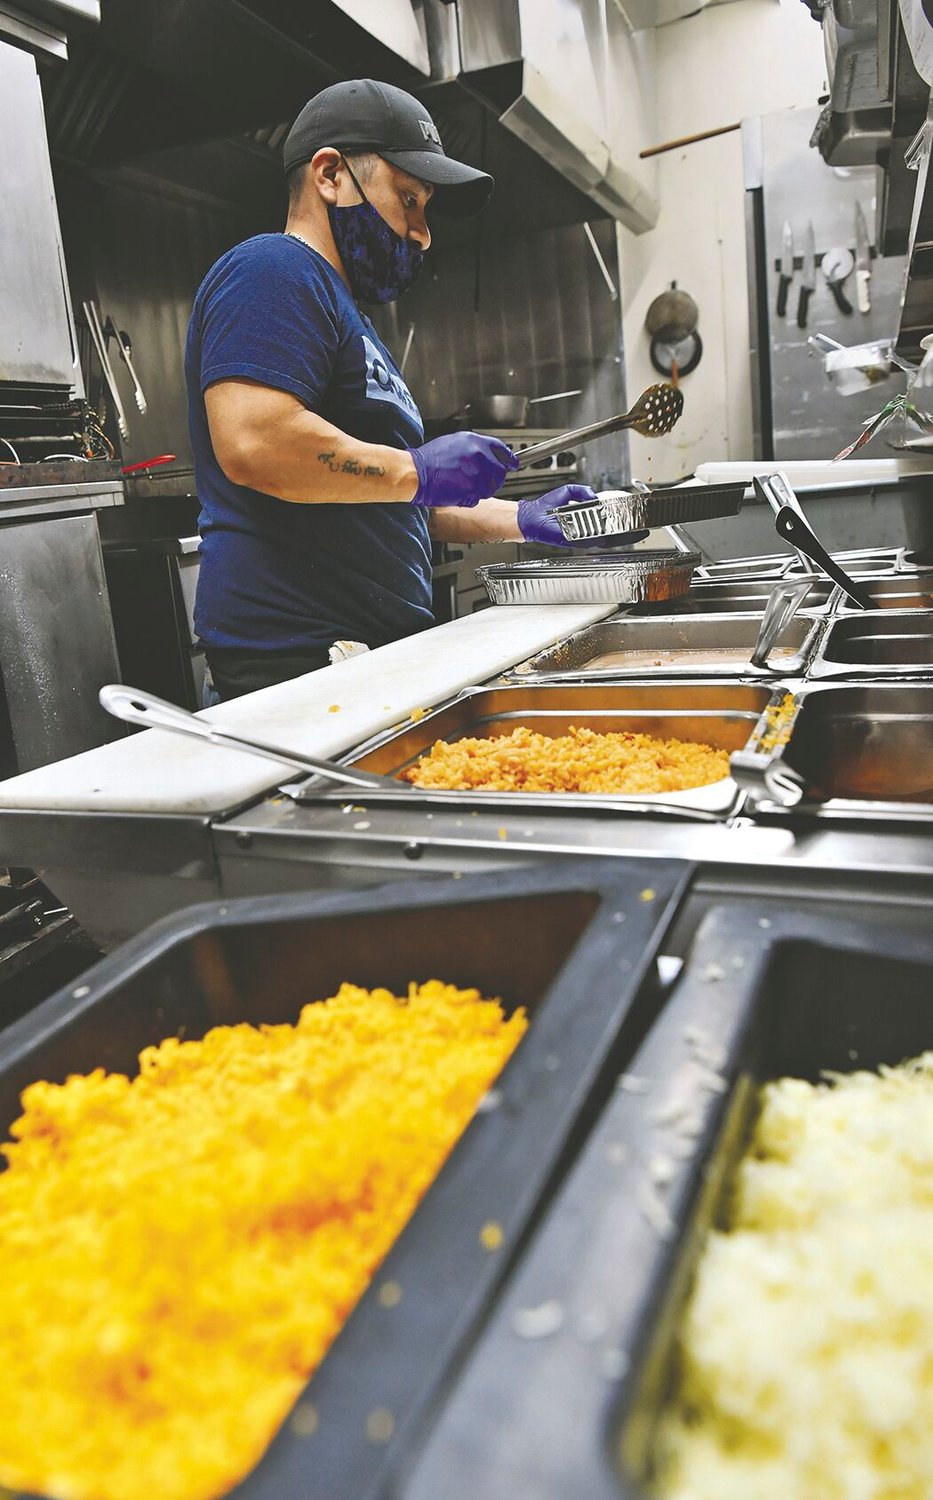 Andres Robles, 37, a cook at Puerto Vallarta restaurant in Yelm, prepares a take-out meal on Tuesday, Nov, 24.